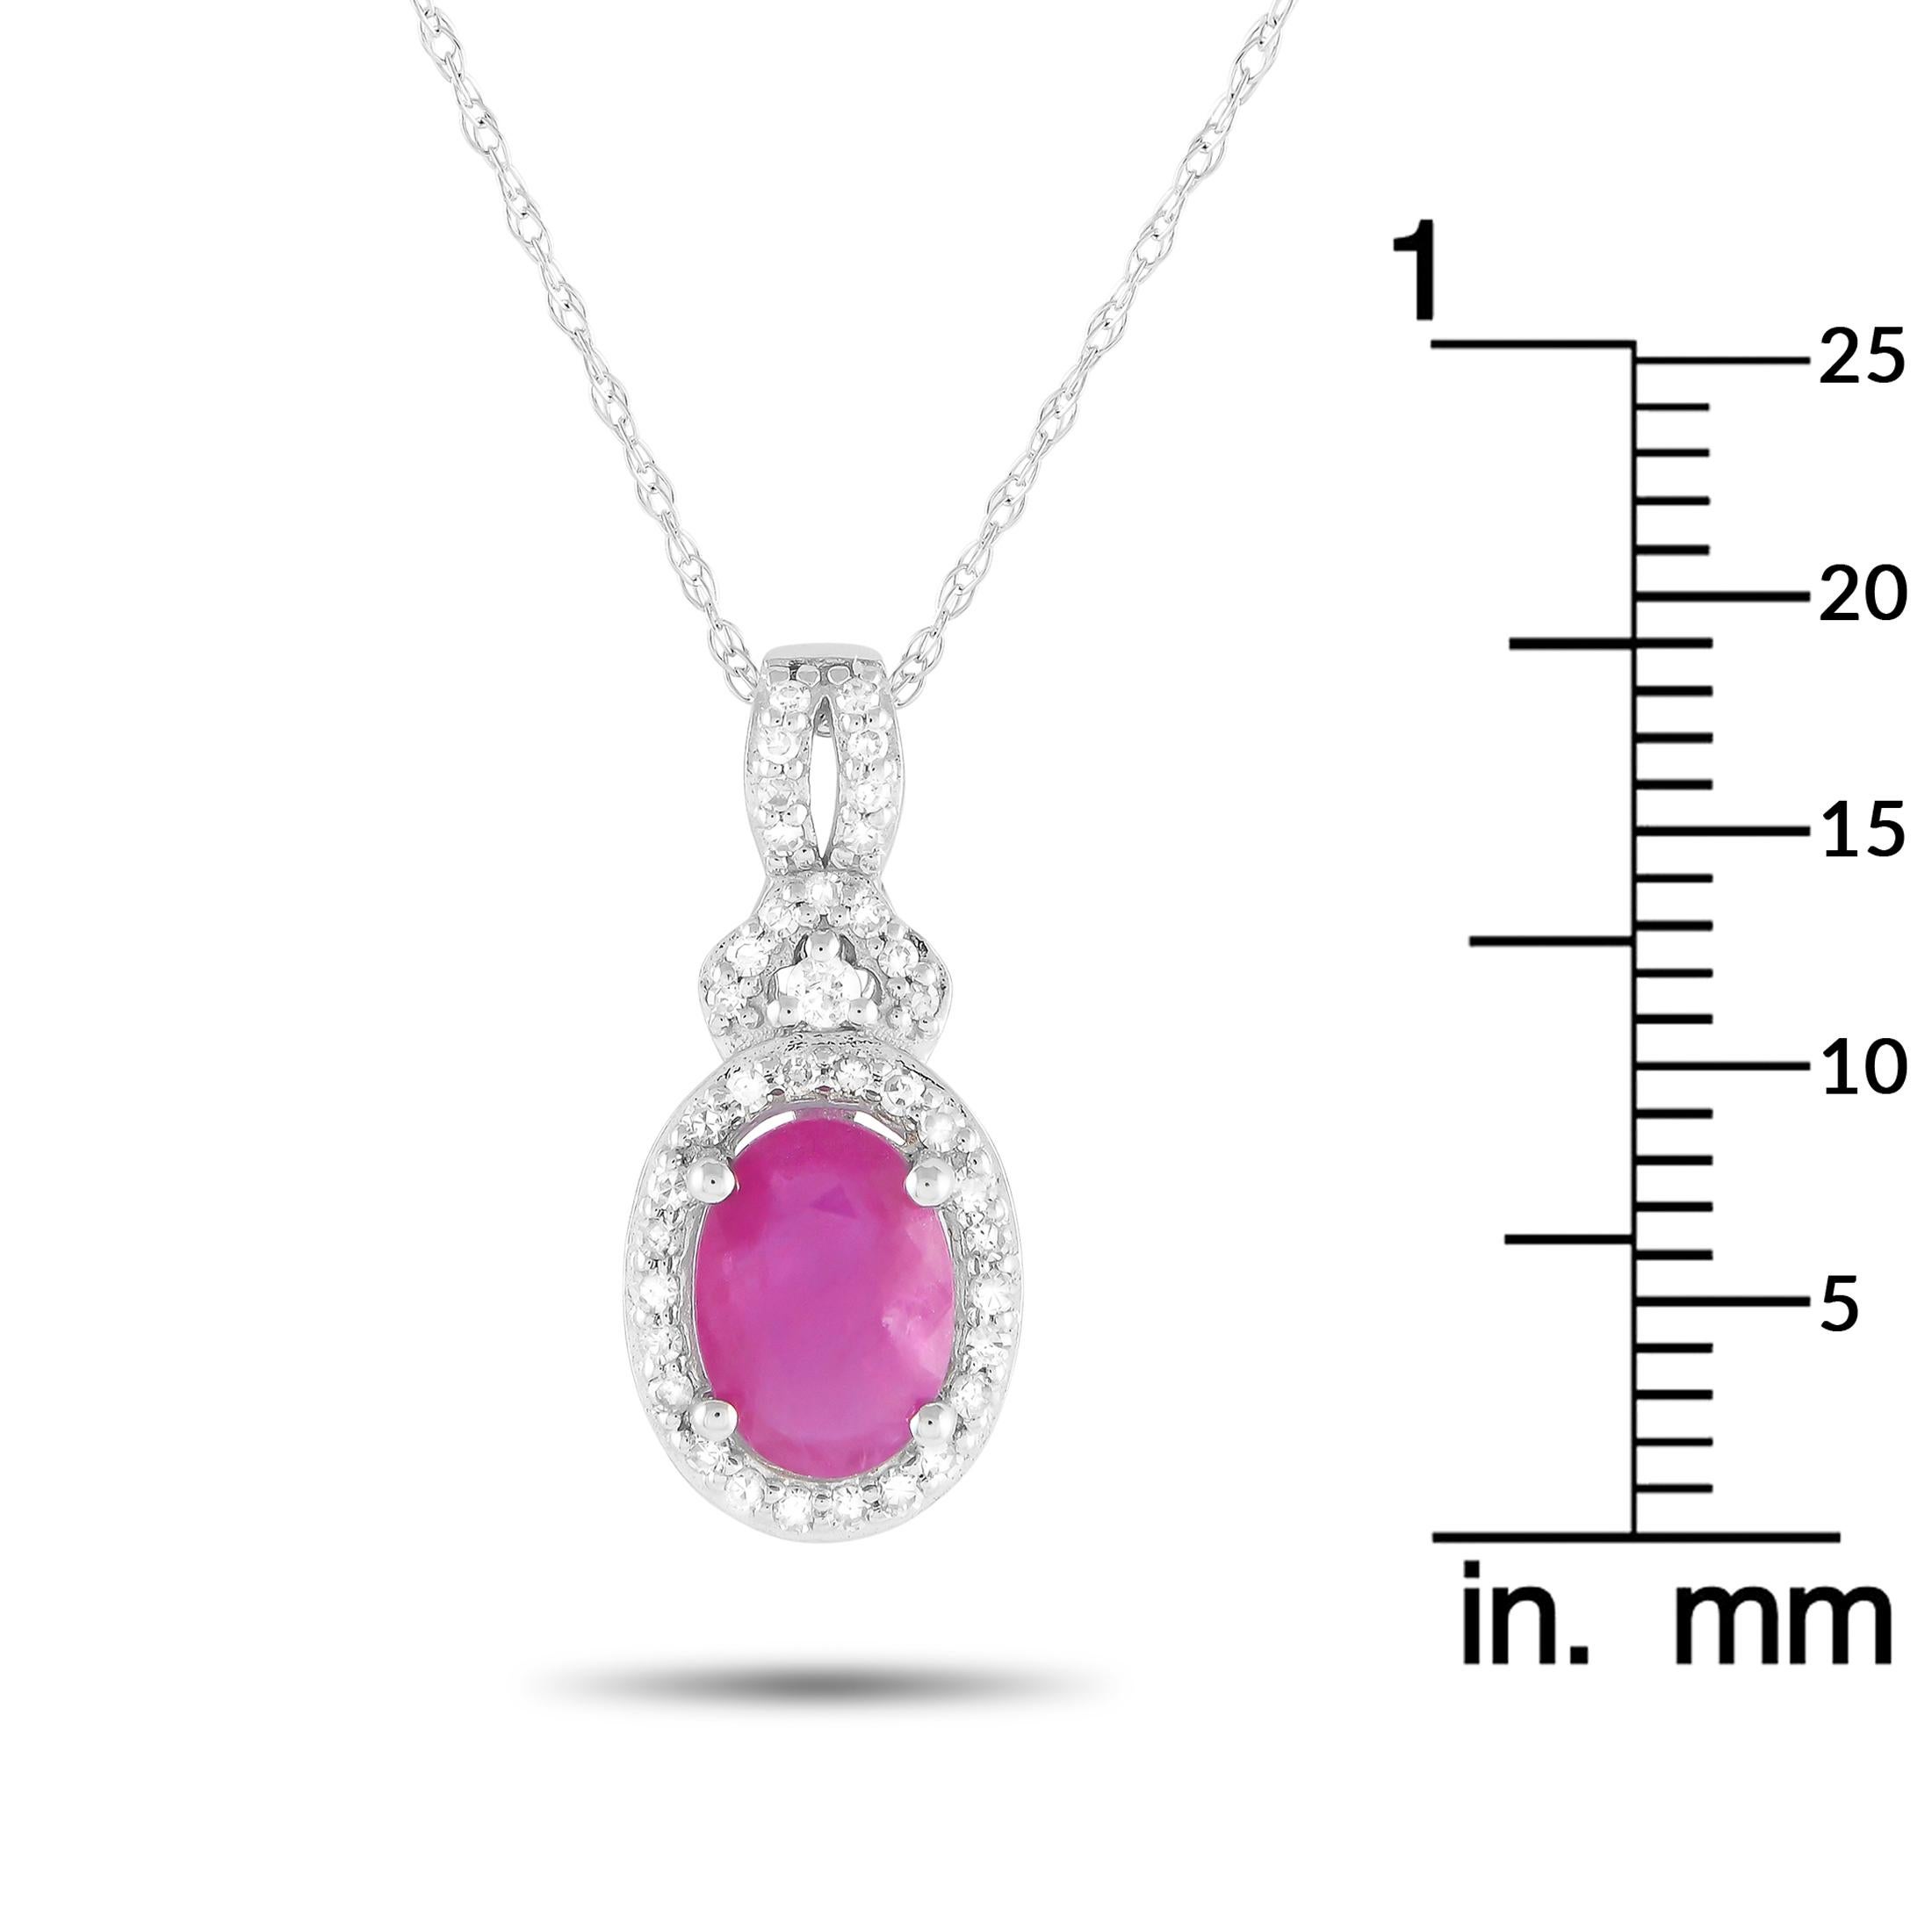 LB Exclusive 14K White Gold 0.15ct Diamond & Ruby Pendant Necklace PD4-15738WRU In New Condition For Sale In Southampton, PA